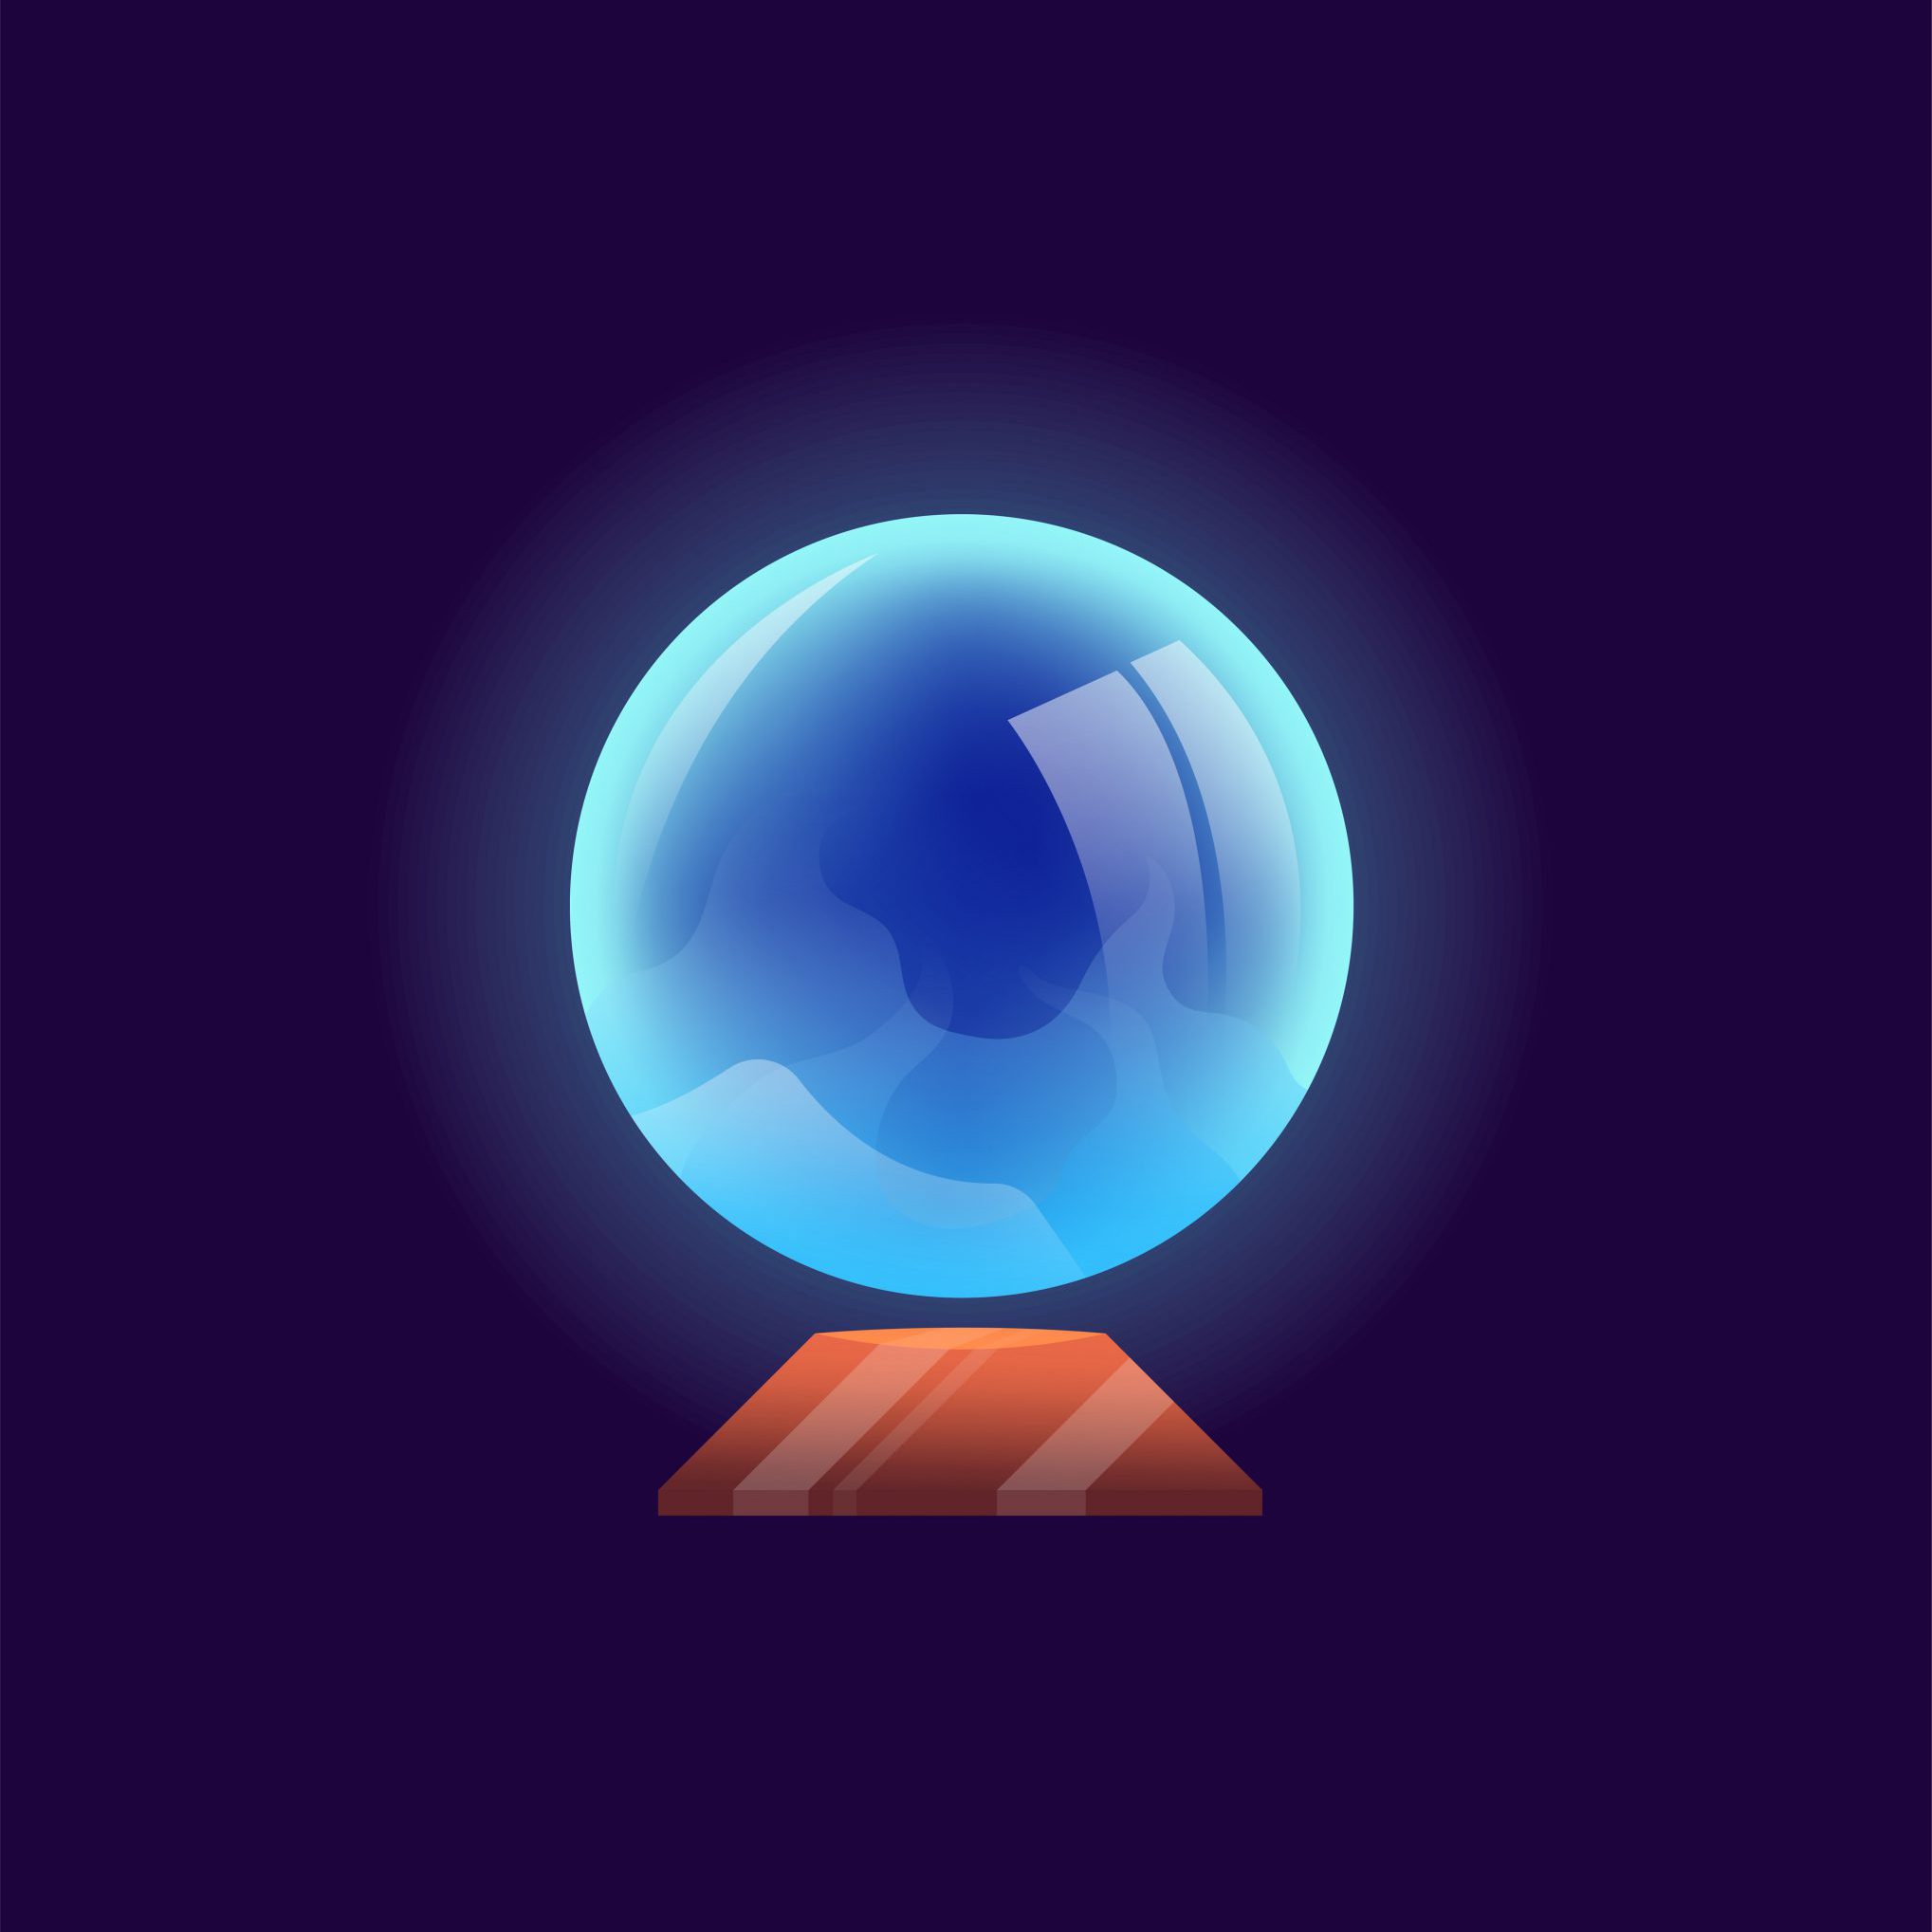 Concept Magic element ball. A mesmerizing flat vector illustration created for web use, portraying a magical cartoon concept on a dark background. Vector illustration.